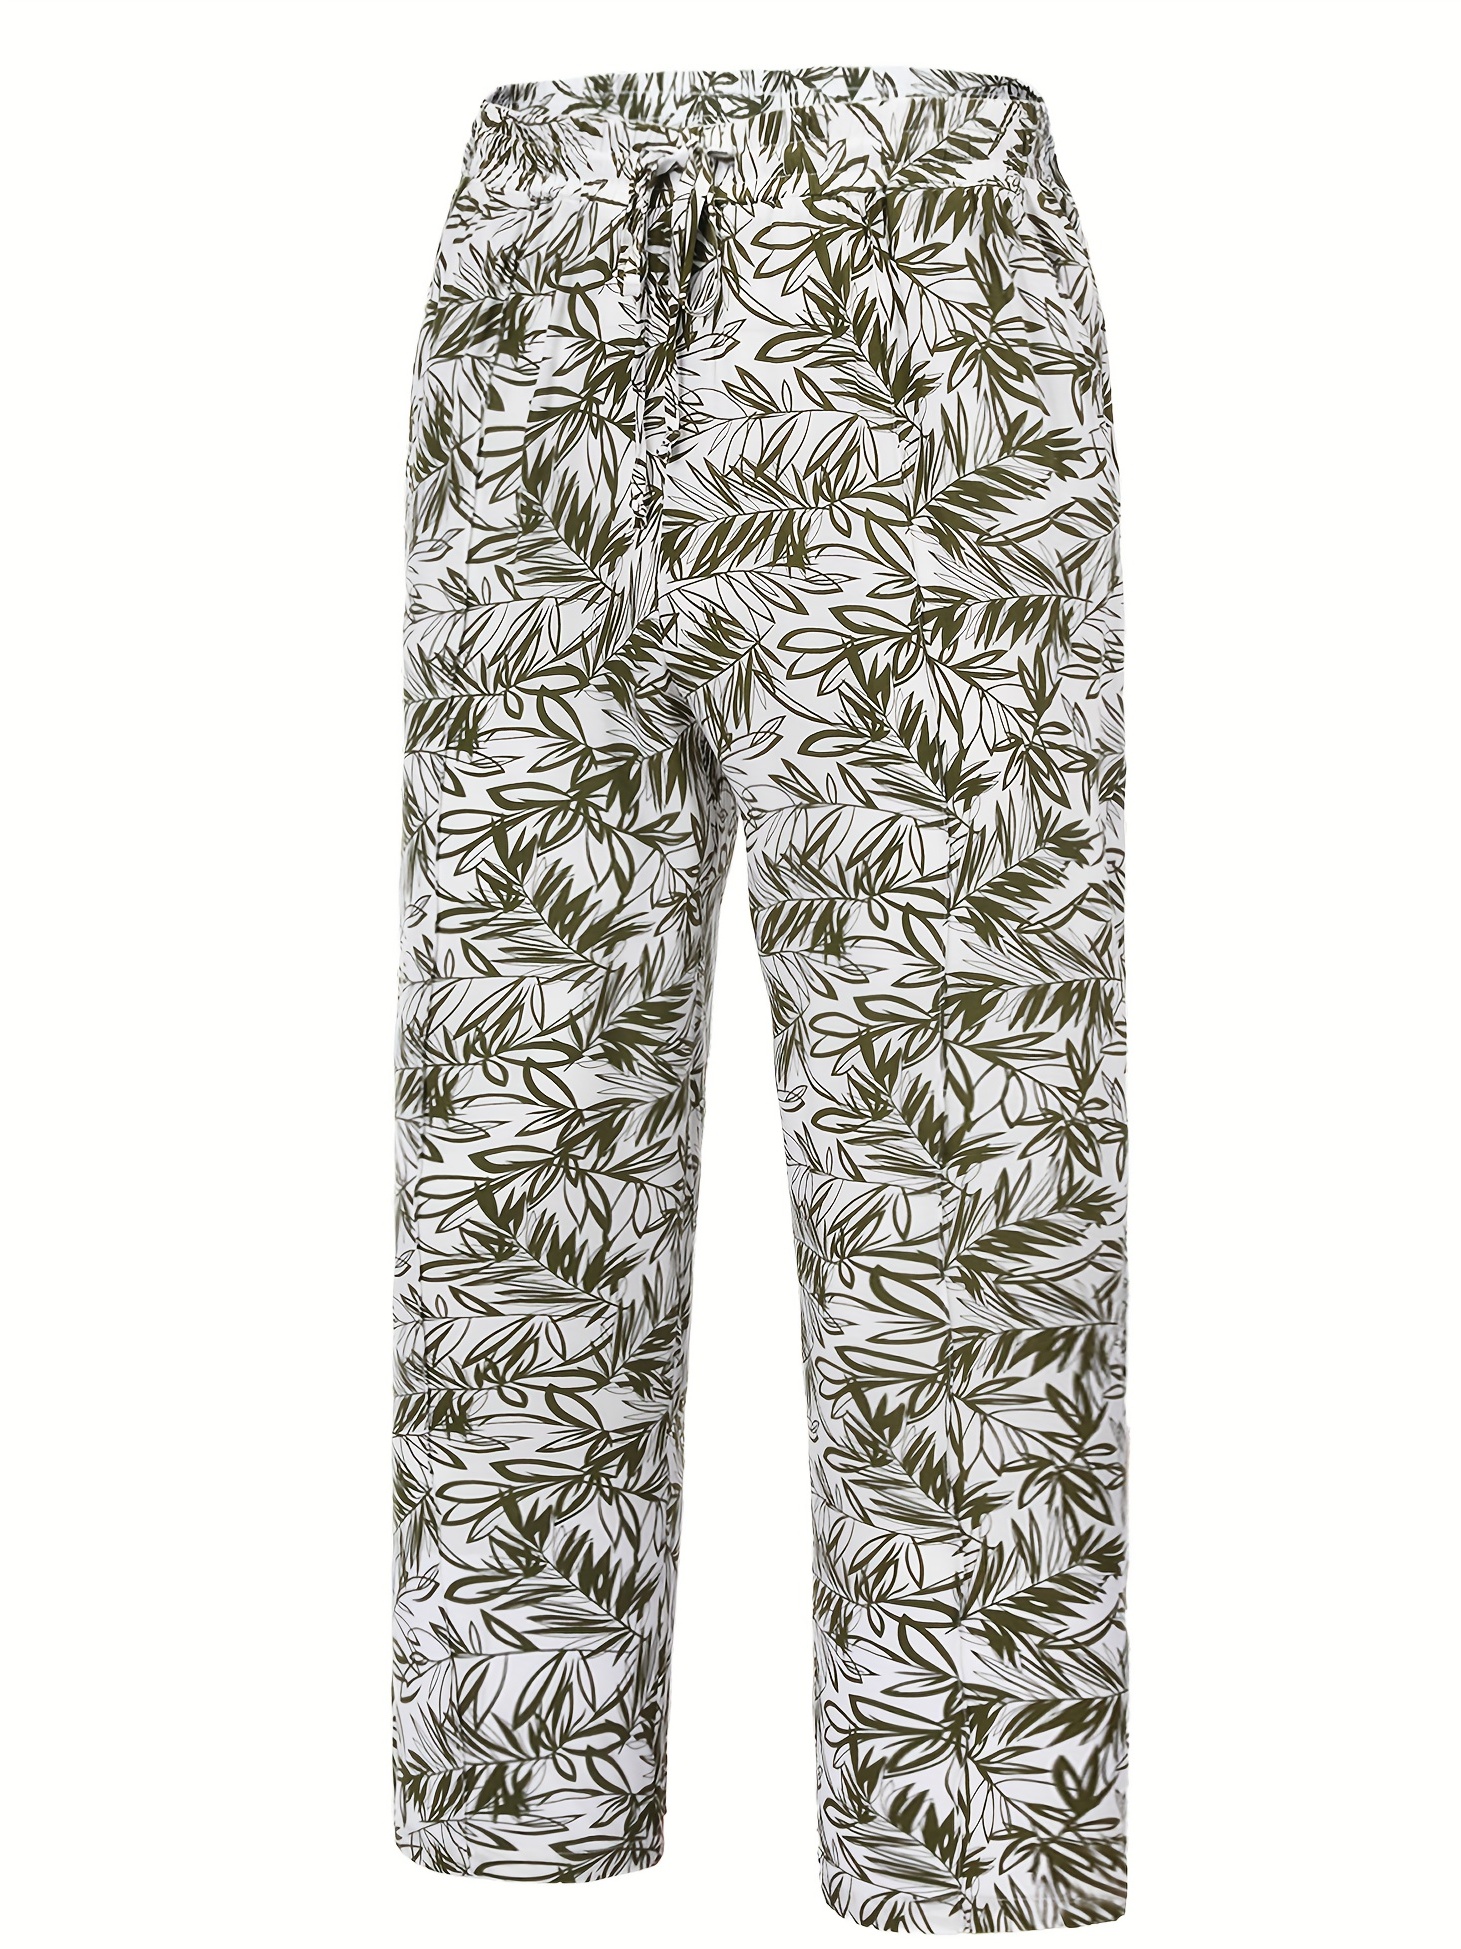 White Stag Black Tropical Floral Hawaiian Print Casual Pants, Size